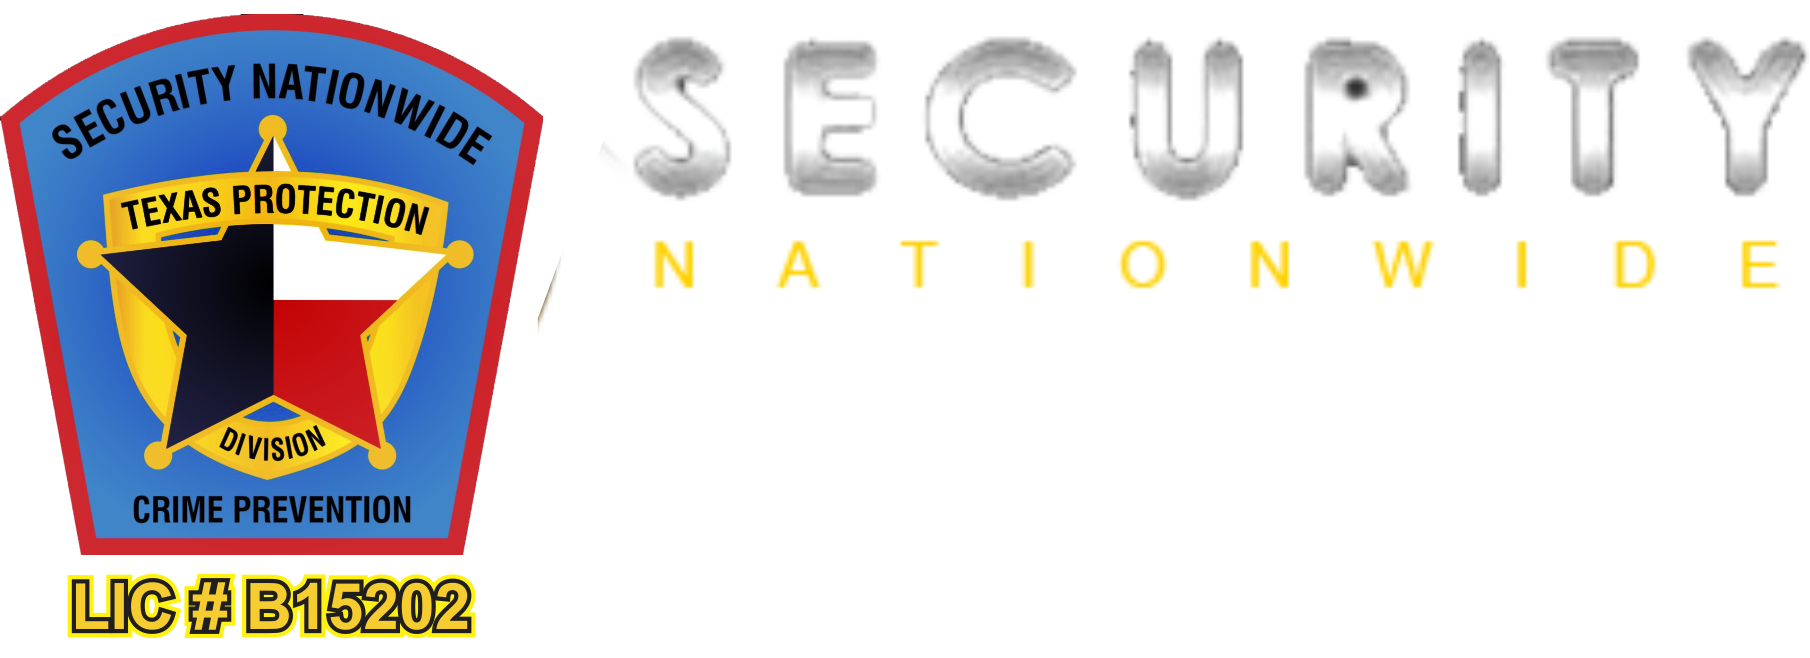 Security Nationwide